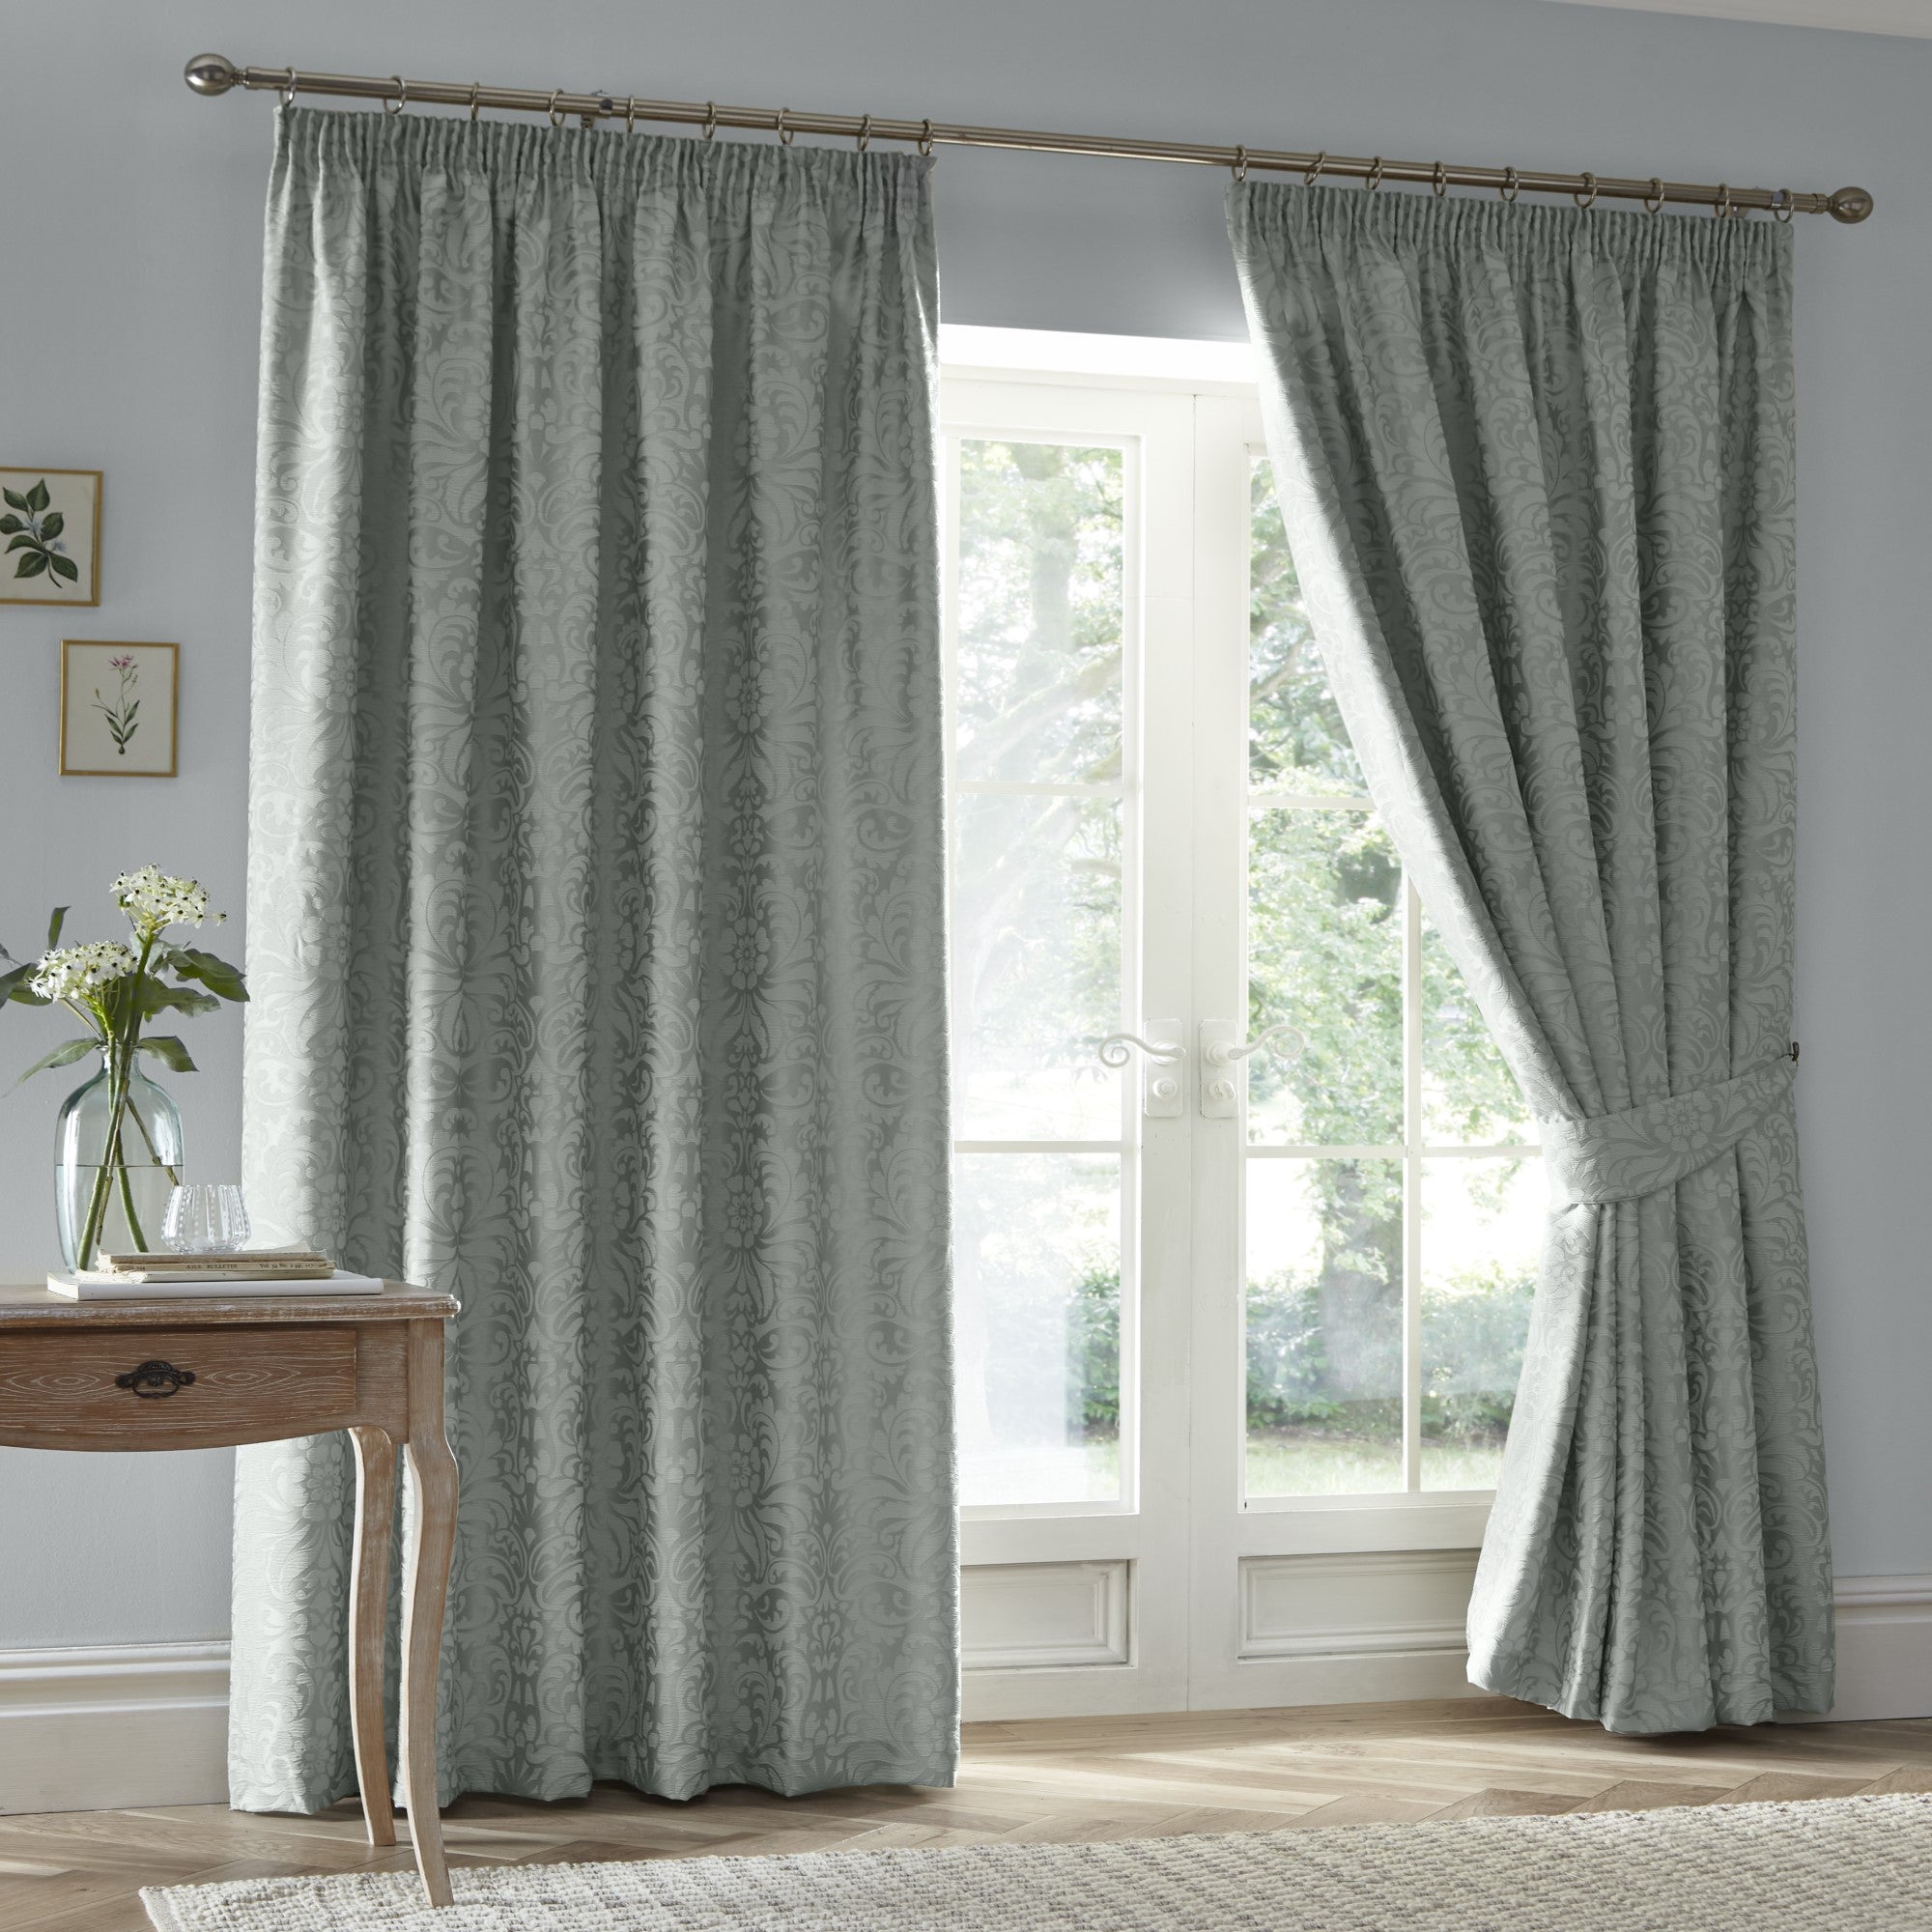 Pair of Pencil Pleat Curtains With Tie-Backs Worcester by Appletree Heritage in Green